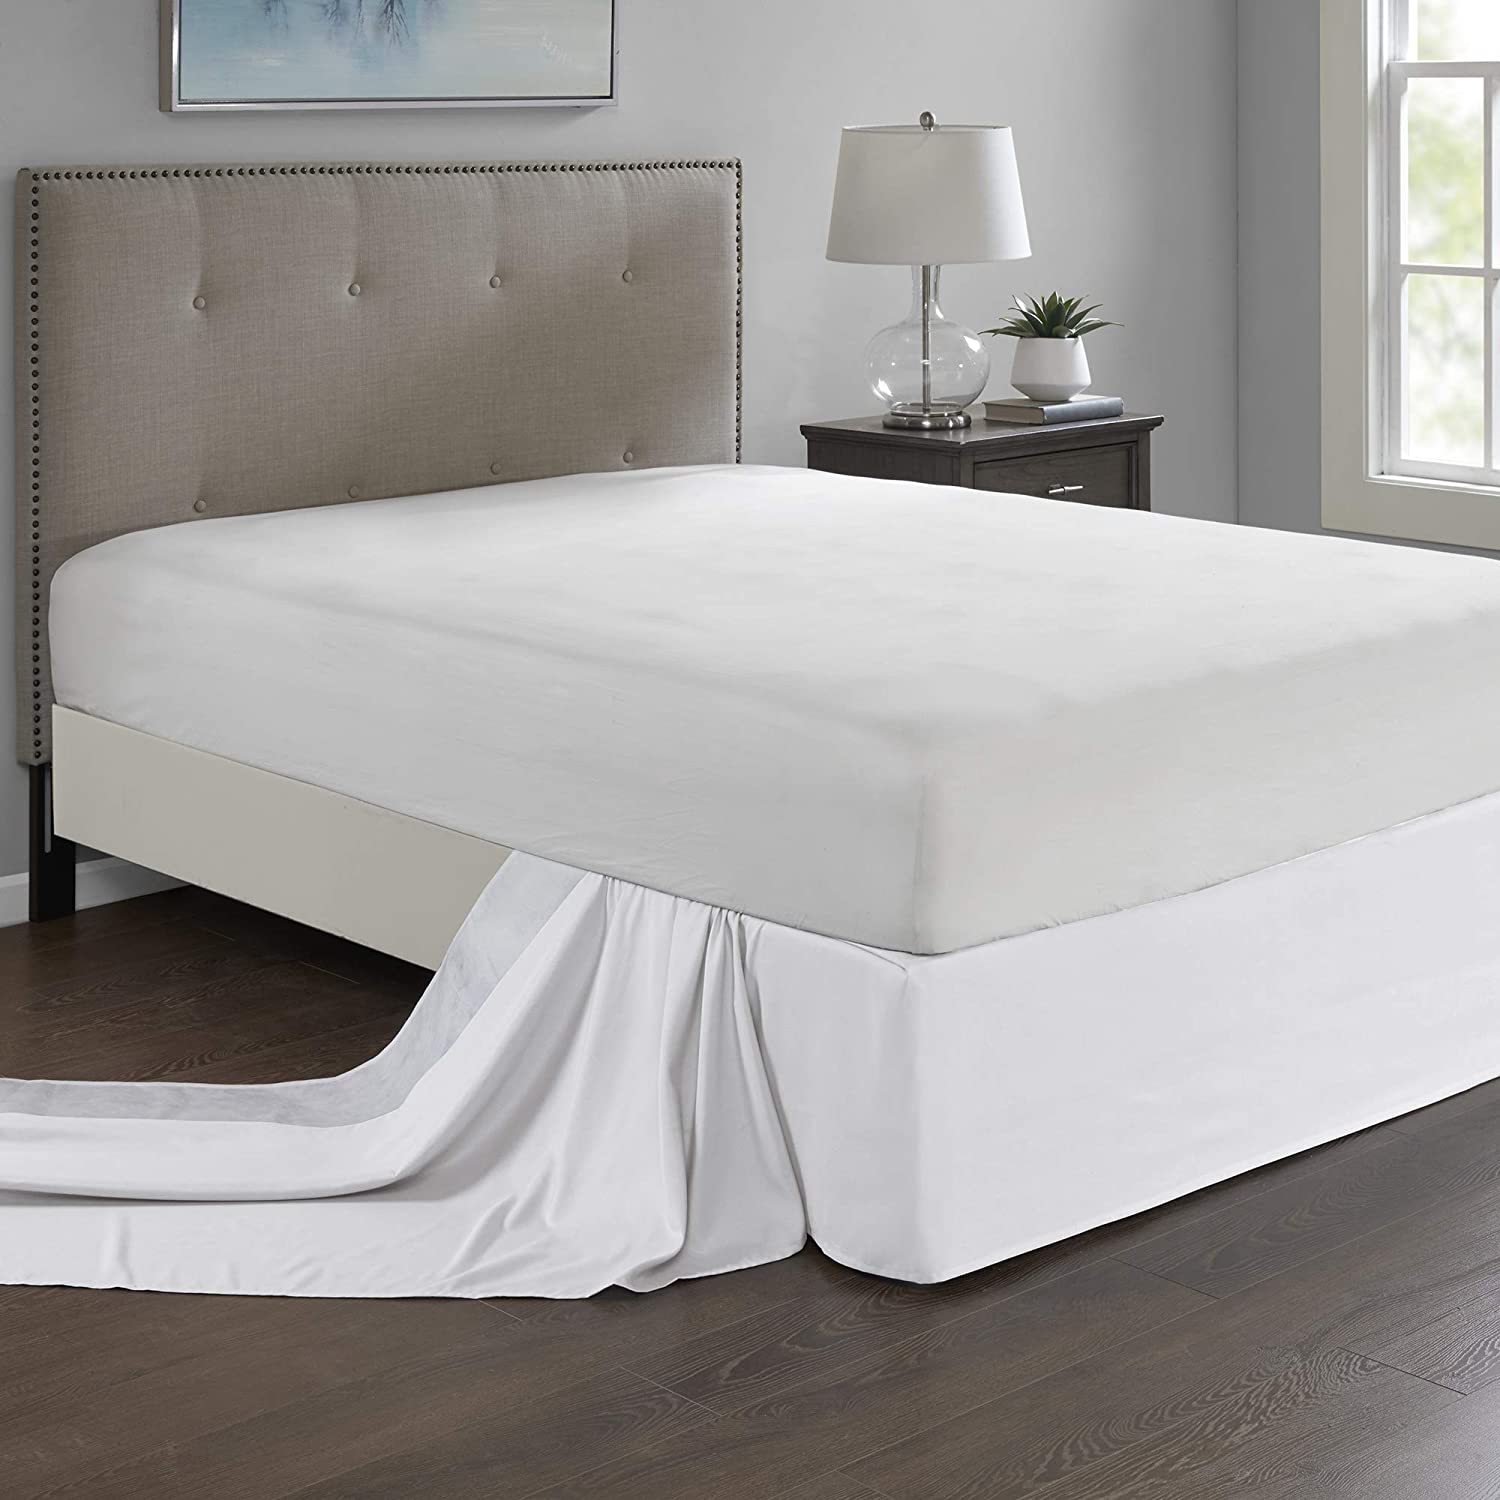 Bed Skirt For An Adjustable, How To Choose An Adjustable Bed Frame